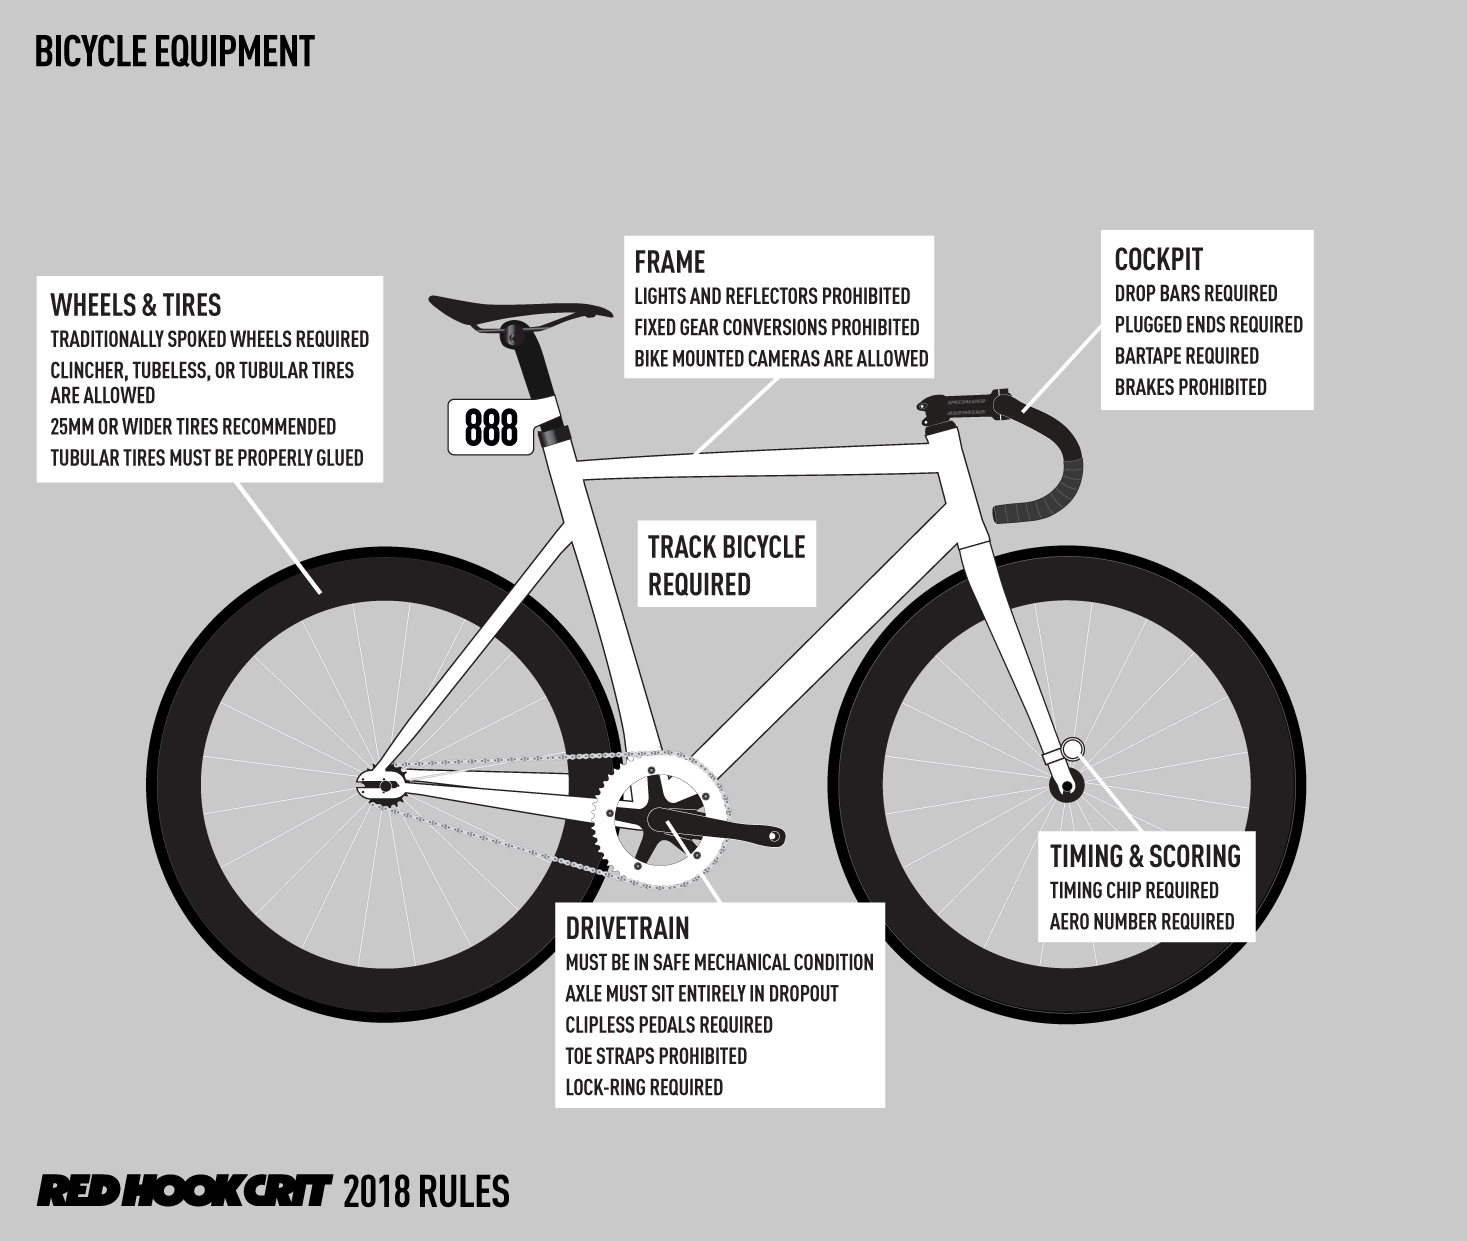 Technical Rules | Red Hook Crit